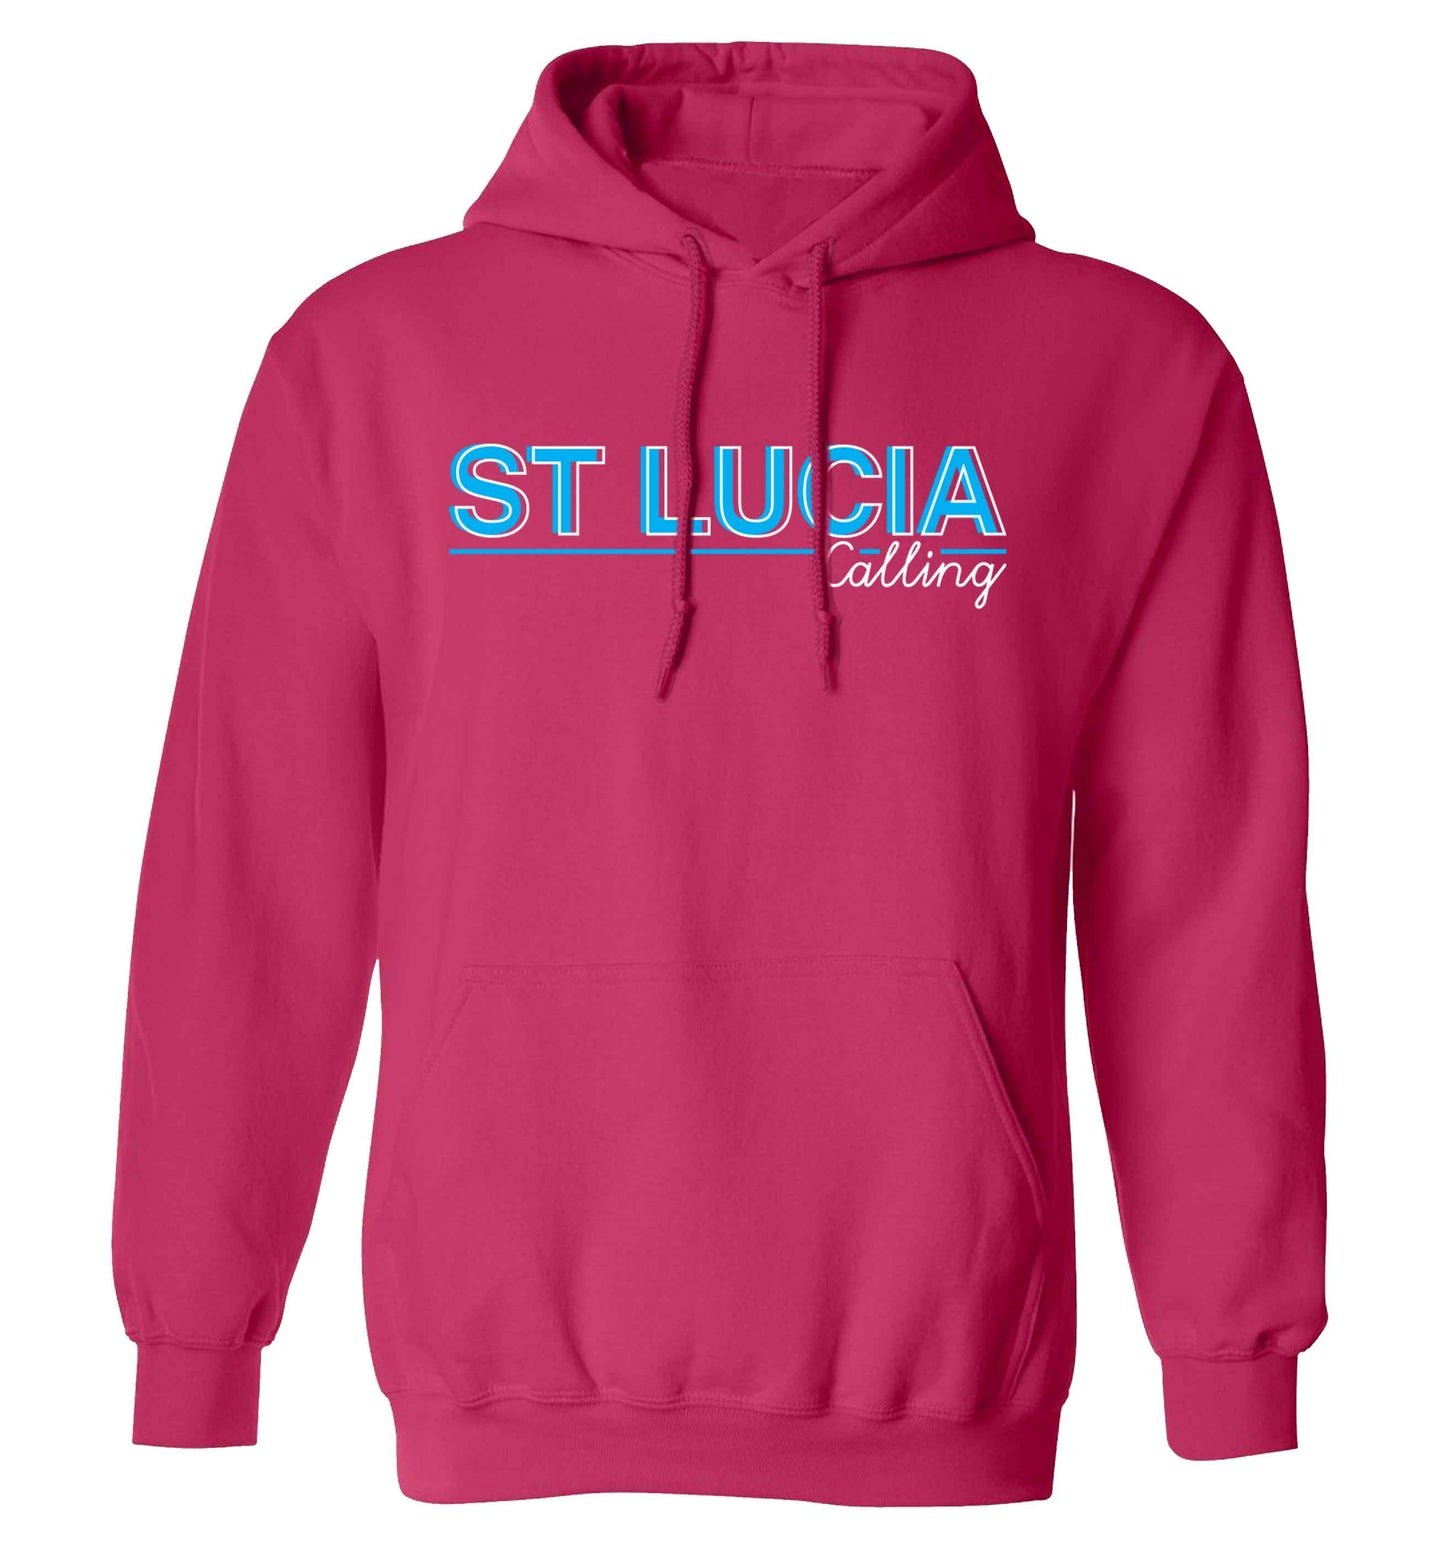 St Lucia calling adults unisex pink hoodie 2XL